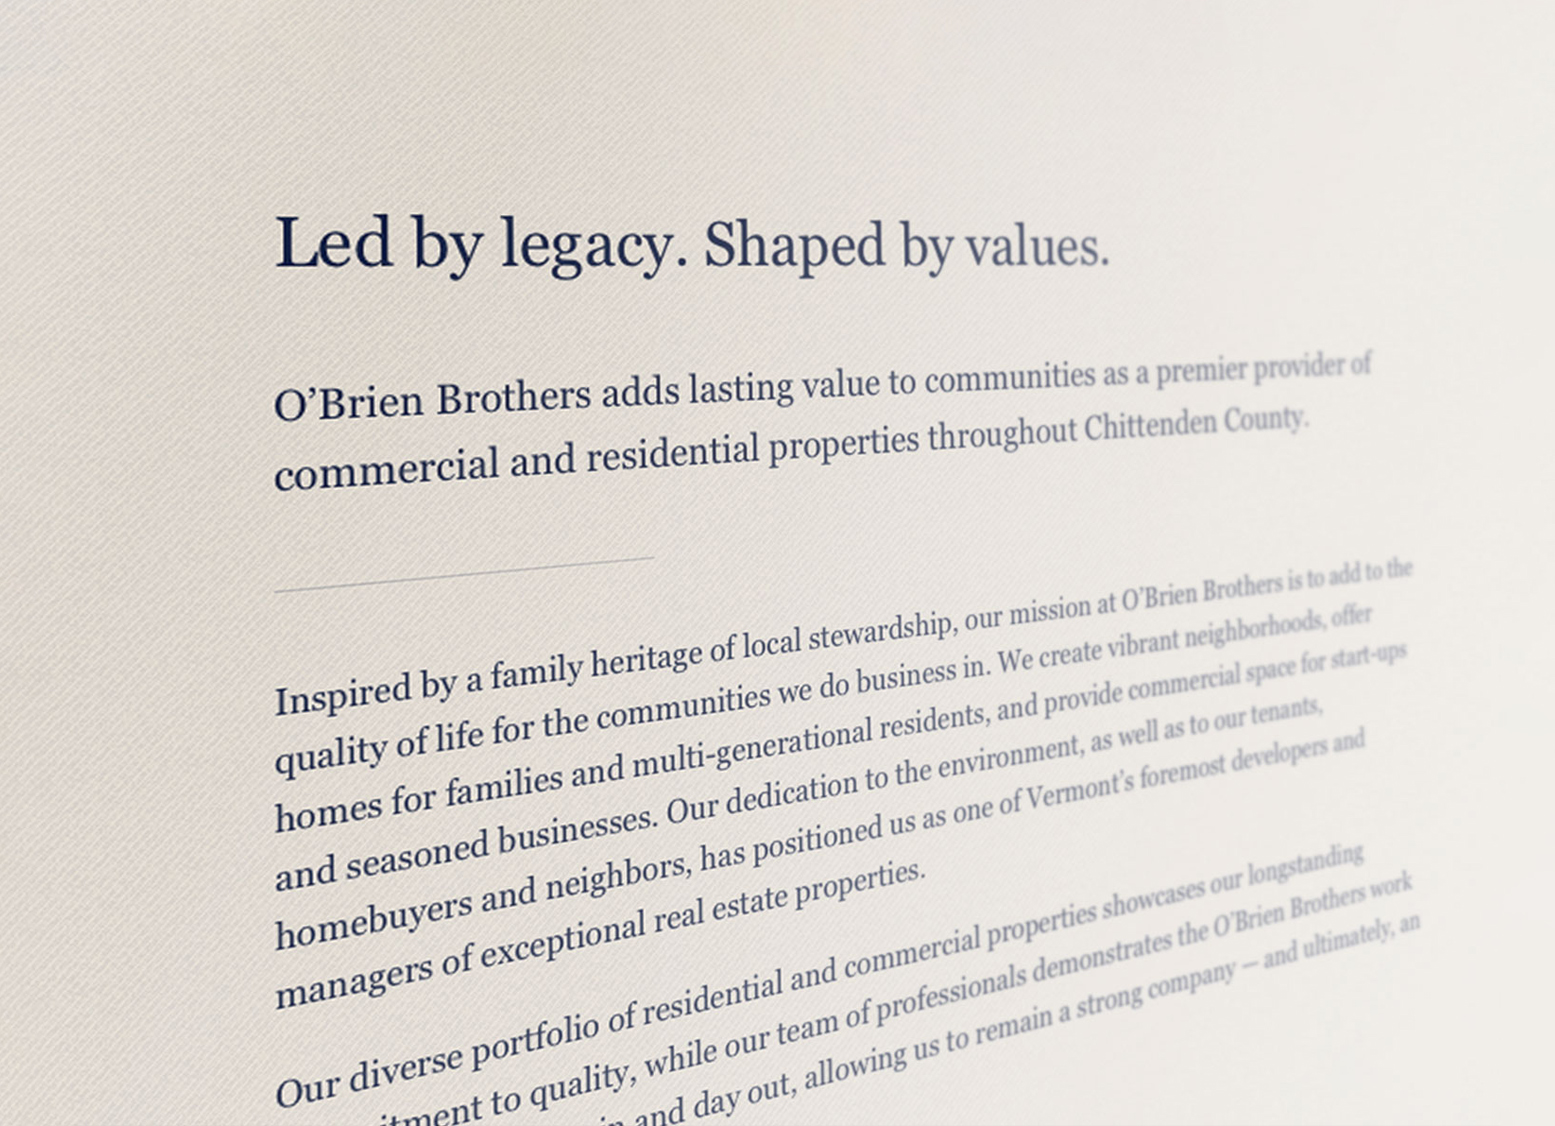 Copywriting text - O'Brien Brothers